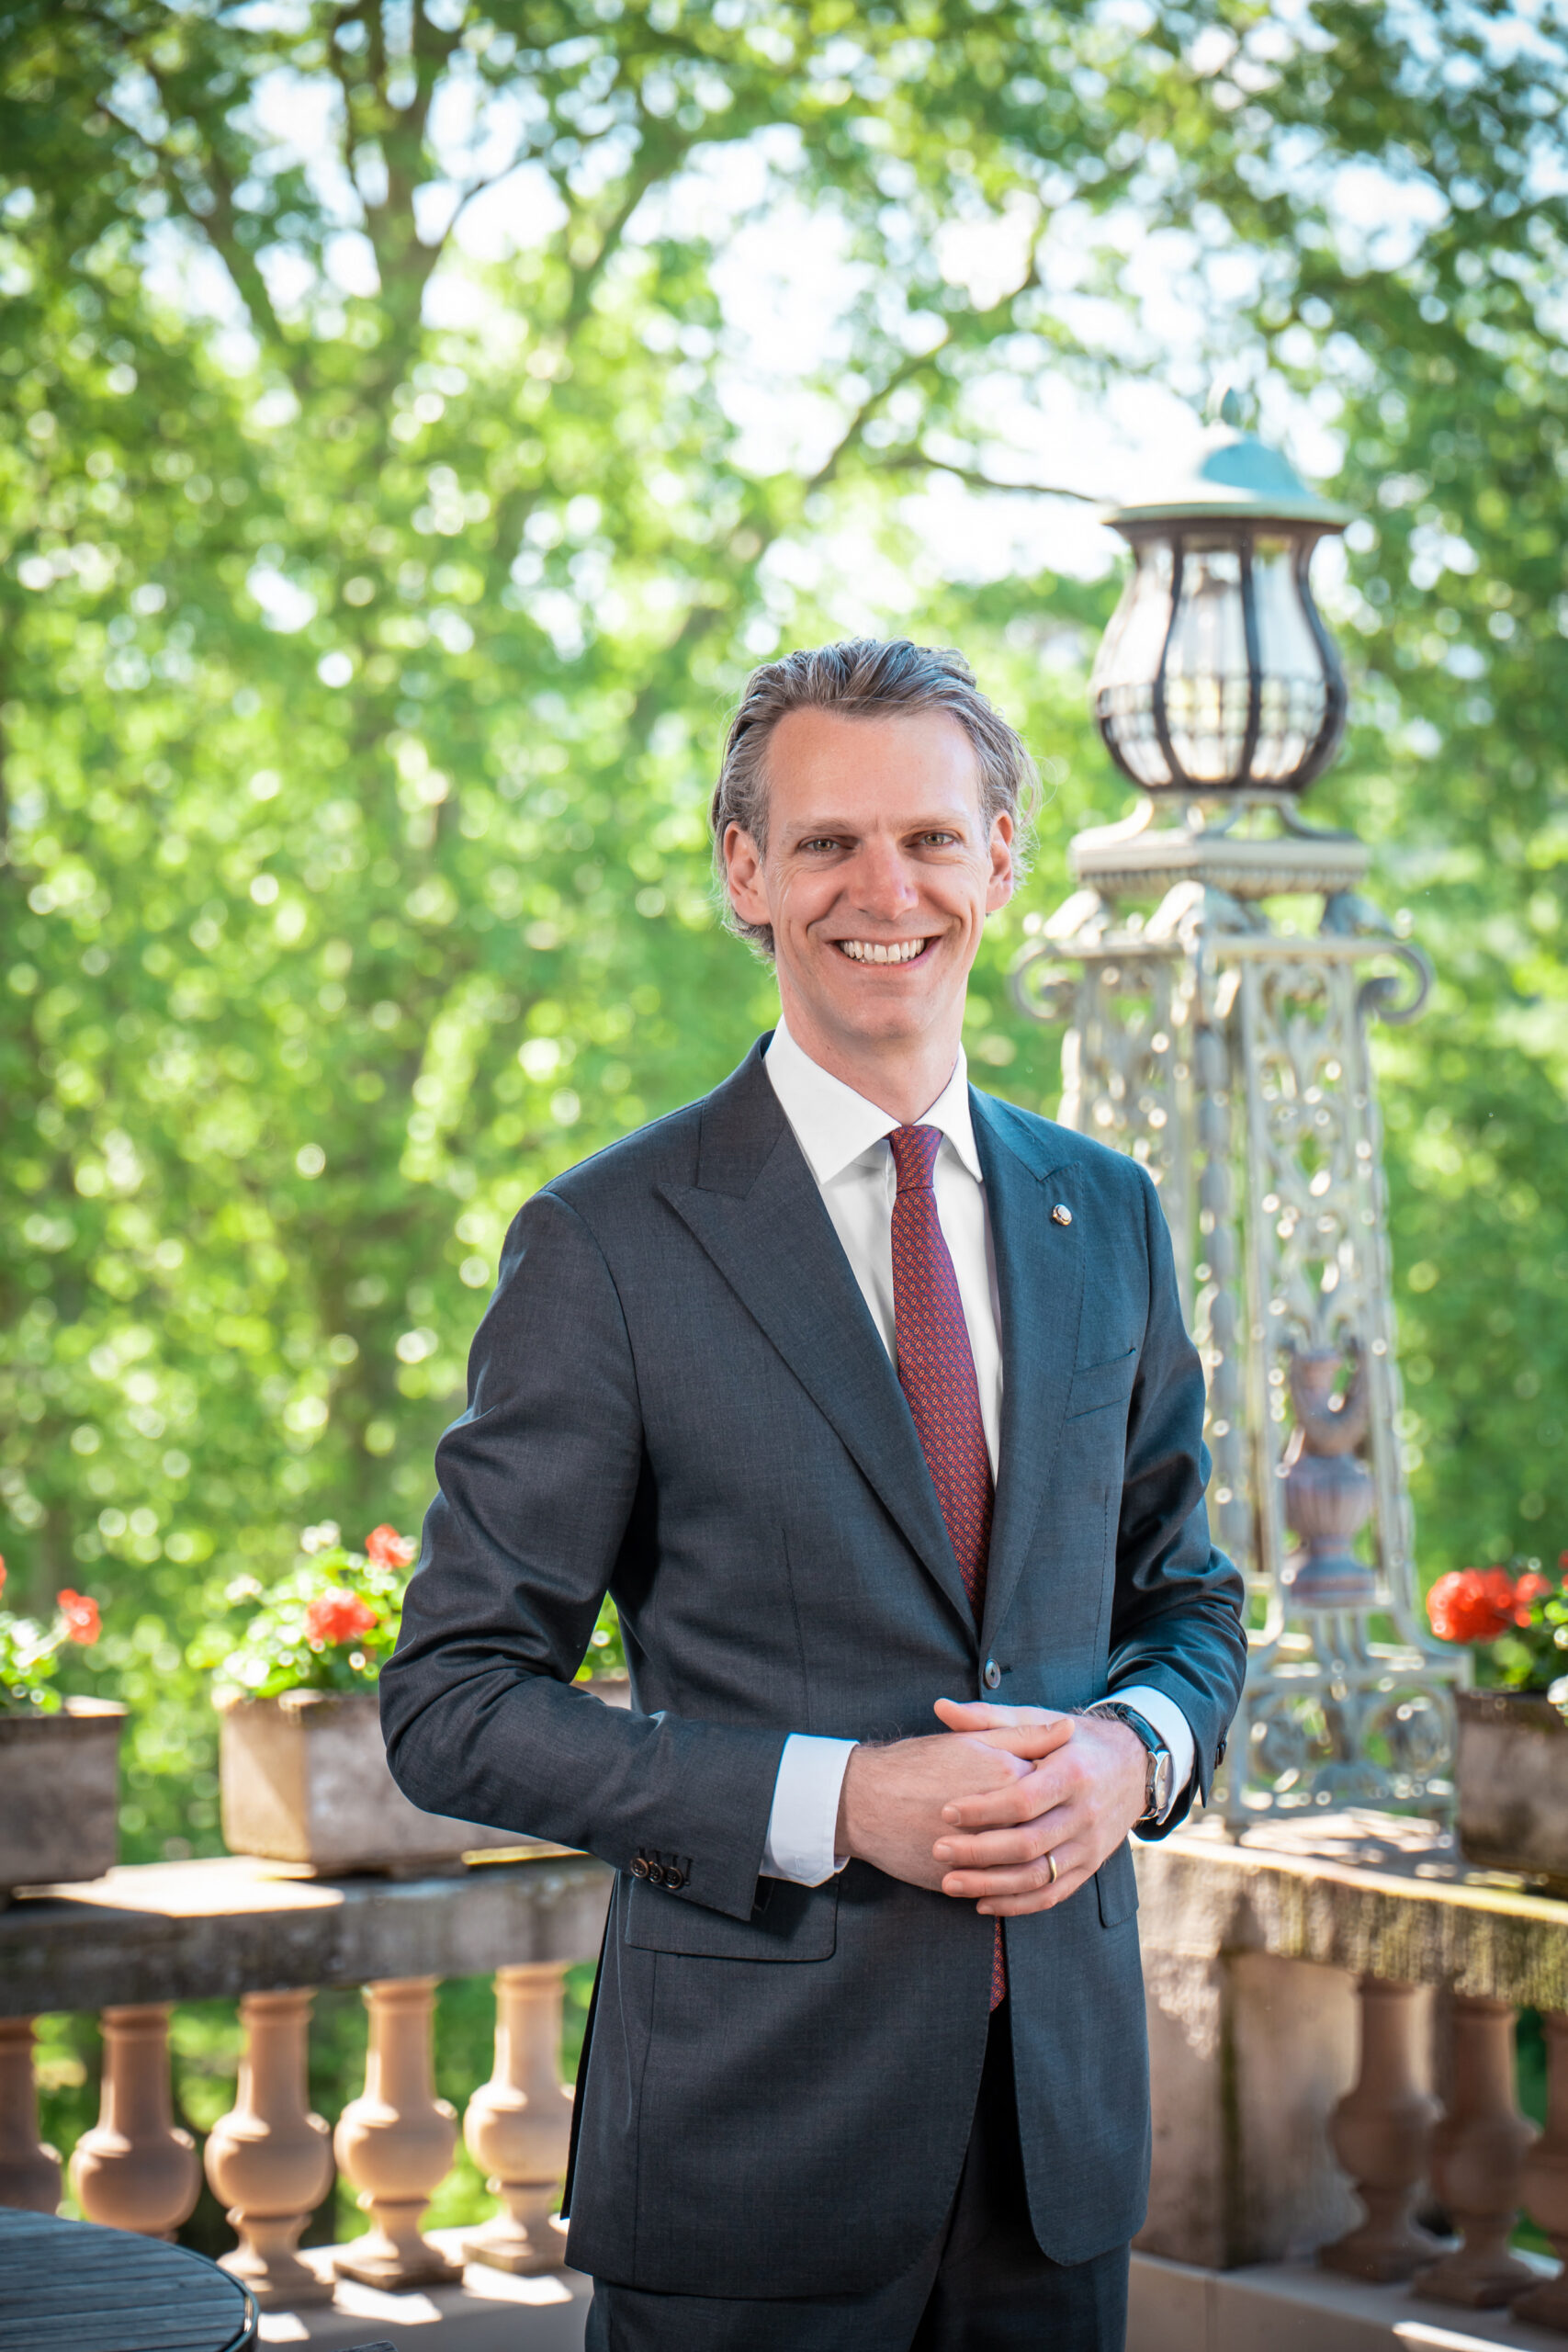 ‘Travelers now prefer staying for longer and travelling to several destinations on their visits’ : Timo Gruenert, Chief Executive Officer, Oetker Collection